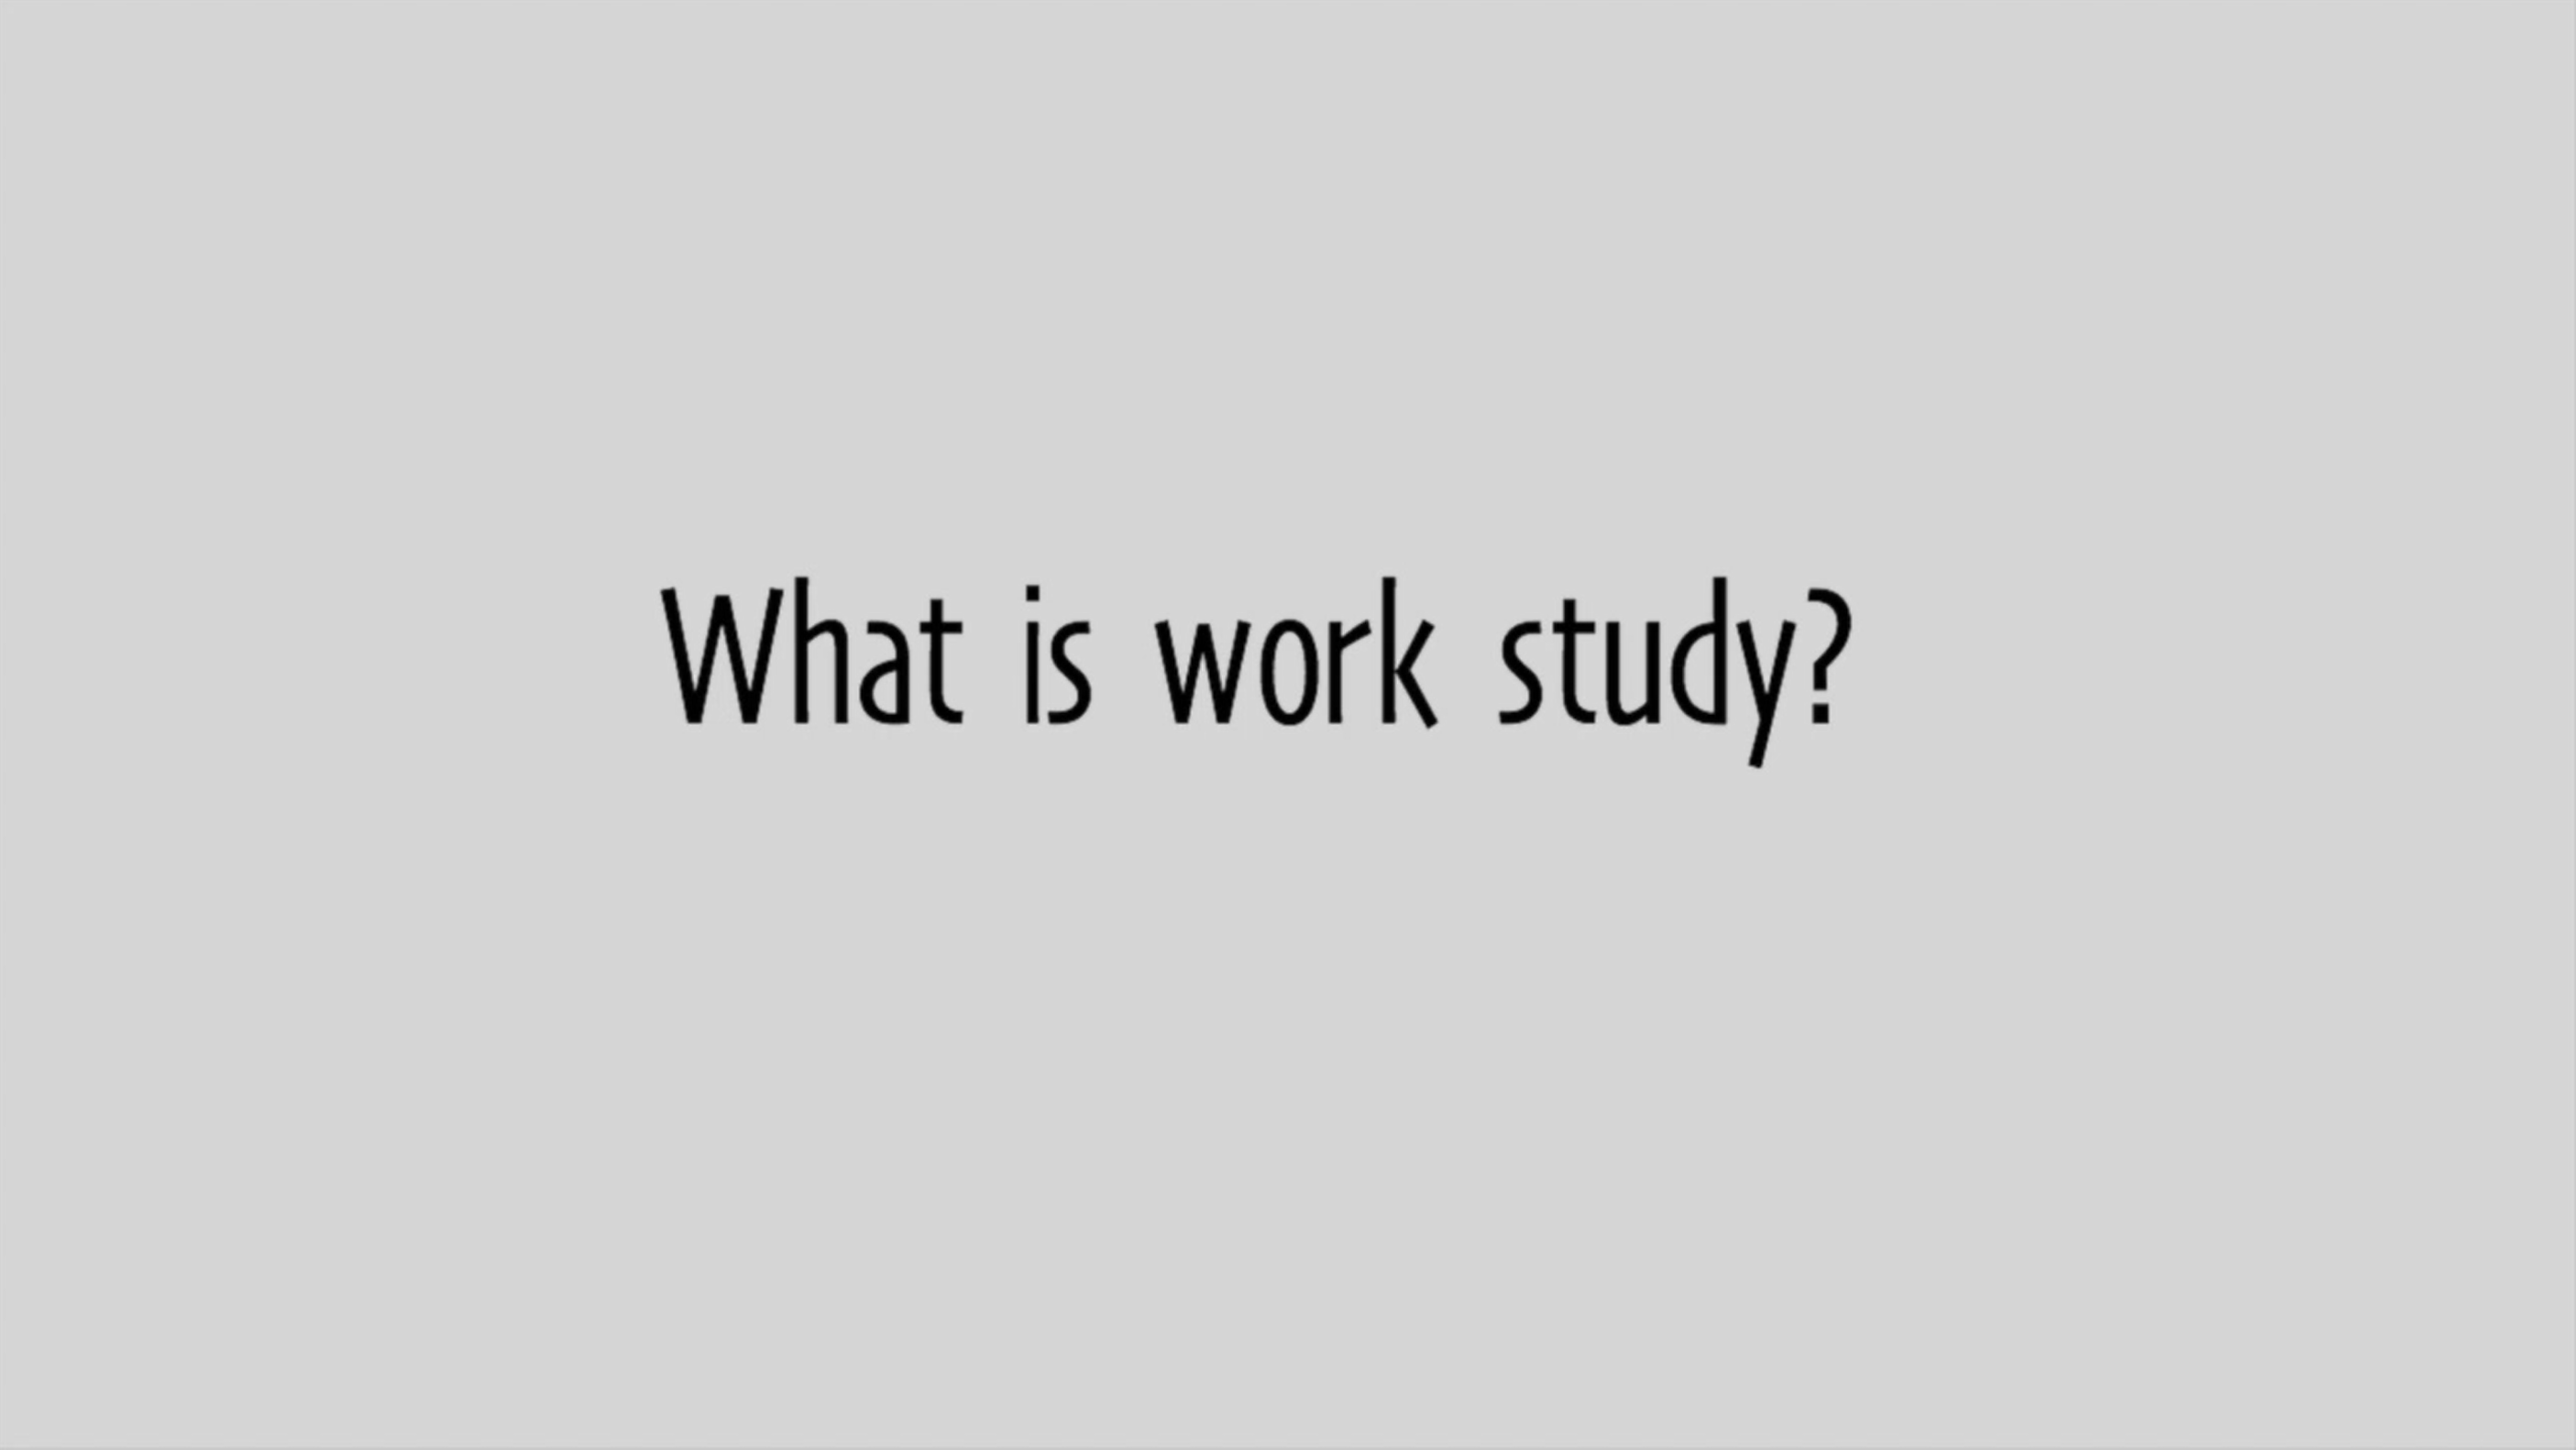 Play 'What is work study?'